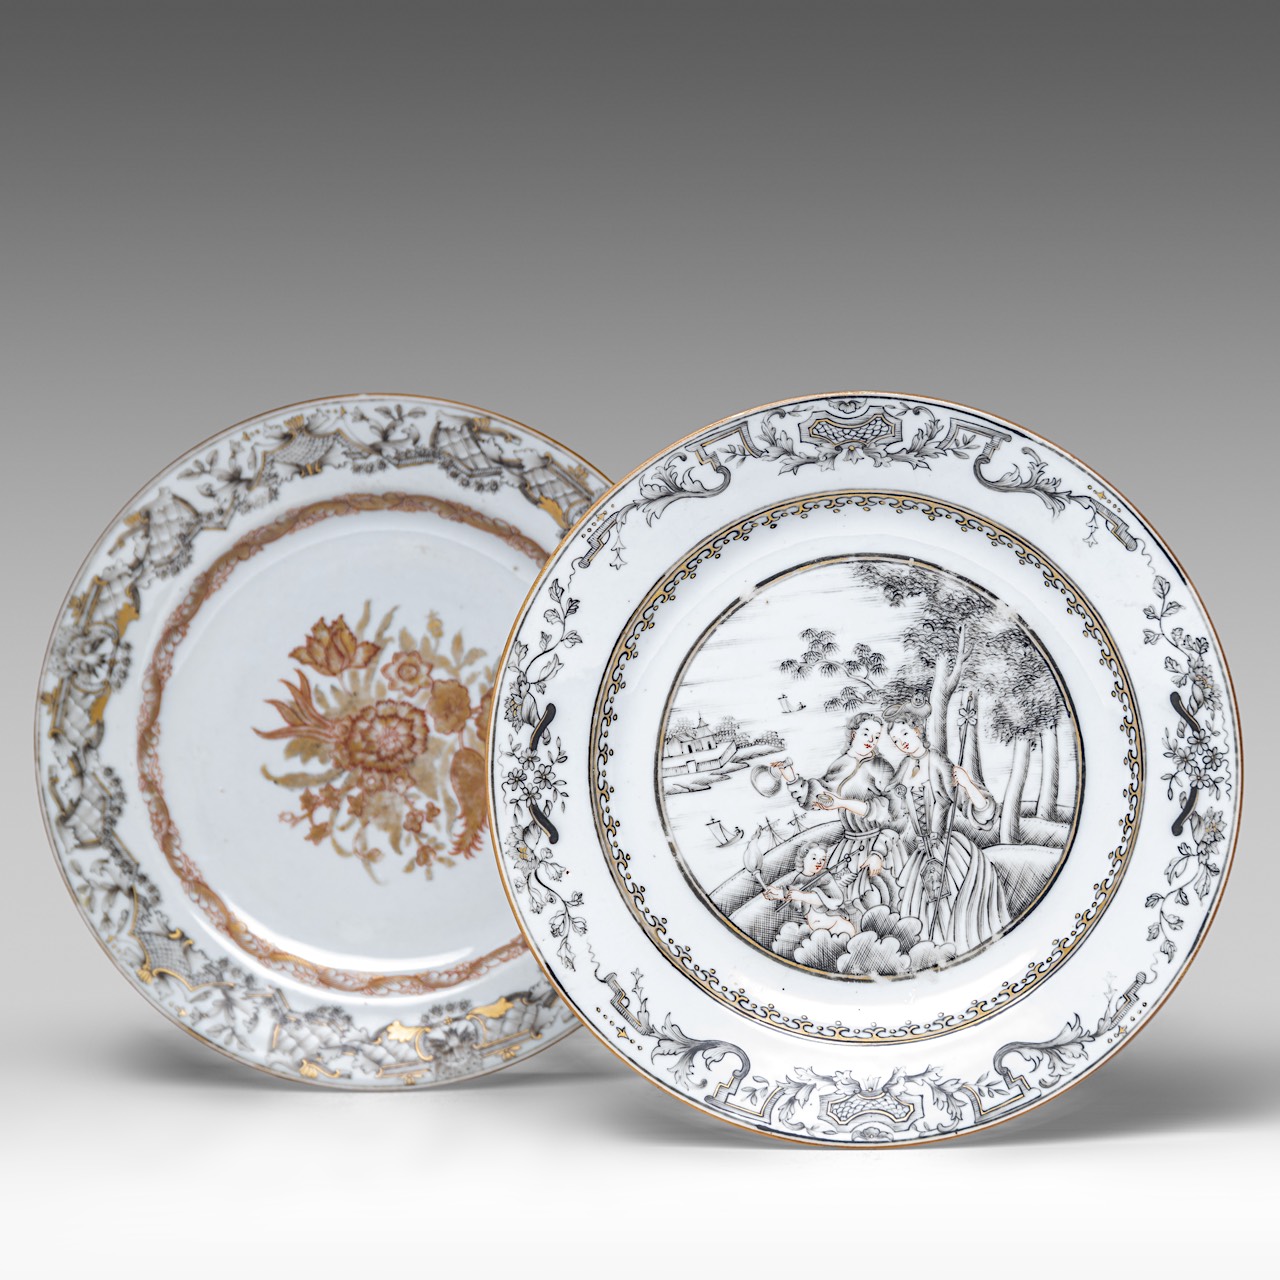 A Chinese export porcelain grisaille 'European subject' dish, 18thC, dia 22,5 cm - added a grisaille